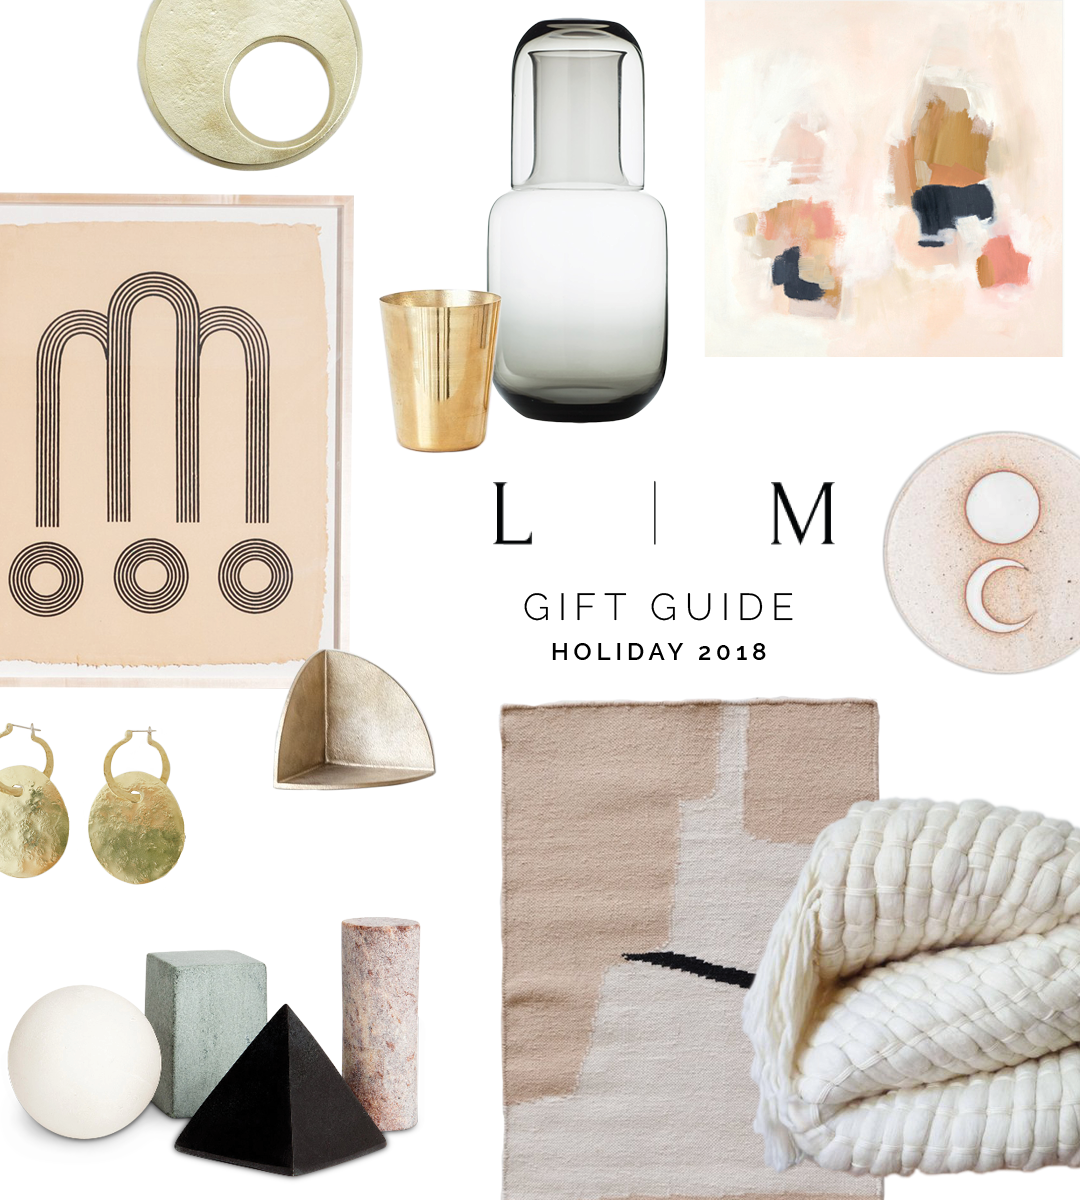 The 2018 Local Milk Holiday & Christmas gift guide is a curation of beautiful, sustainable, minimalist, and hand-crafted ideas for slow living, the minimalist, fashion, wellness, home, stocking stuffers, babies & kids, and him & her to suit every budget. We have gifts from artisans, makers, small shops, designers, and more. 